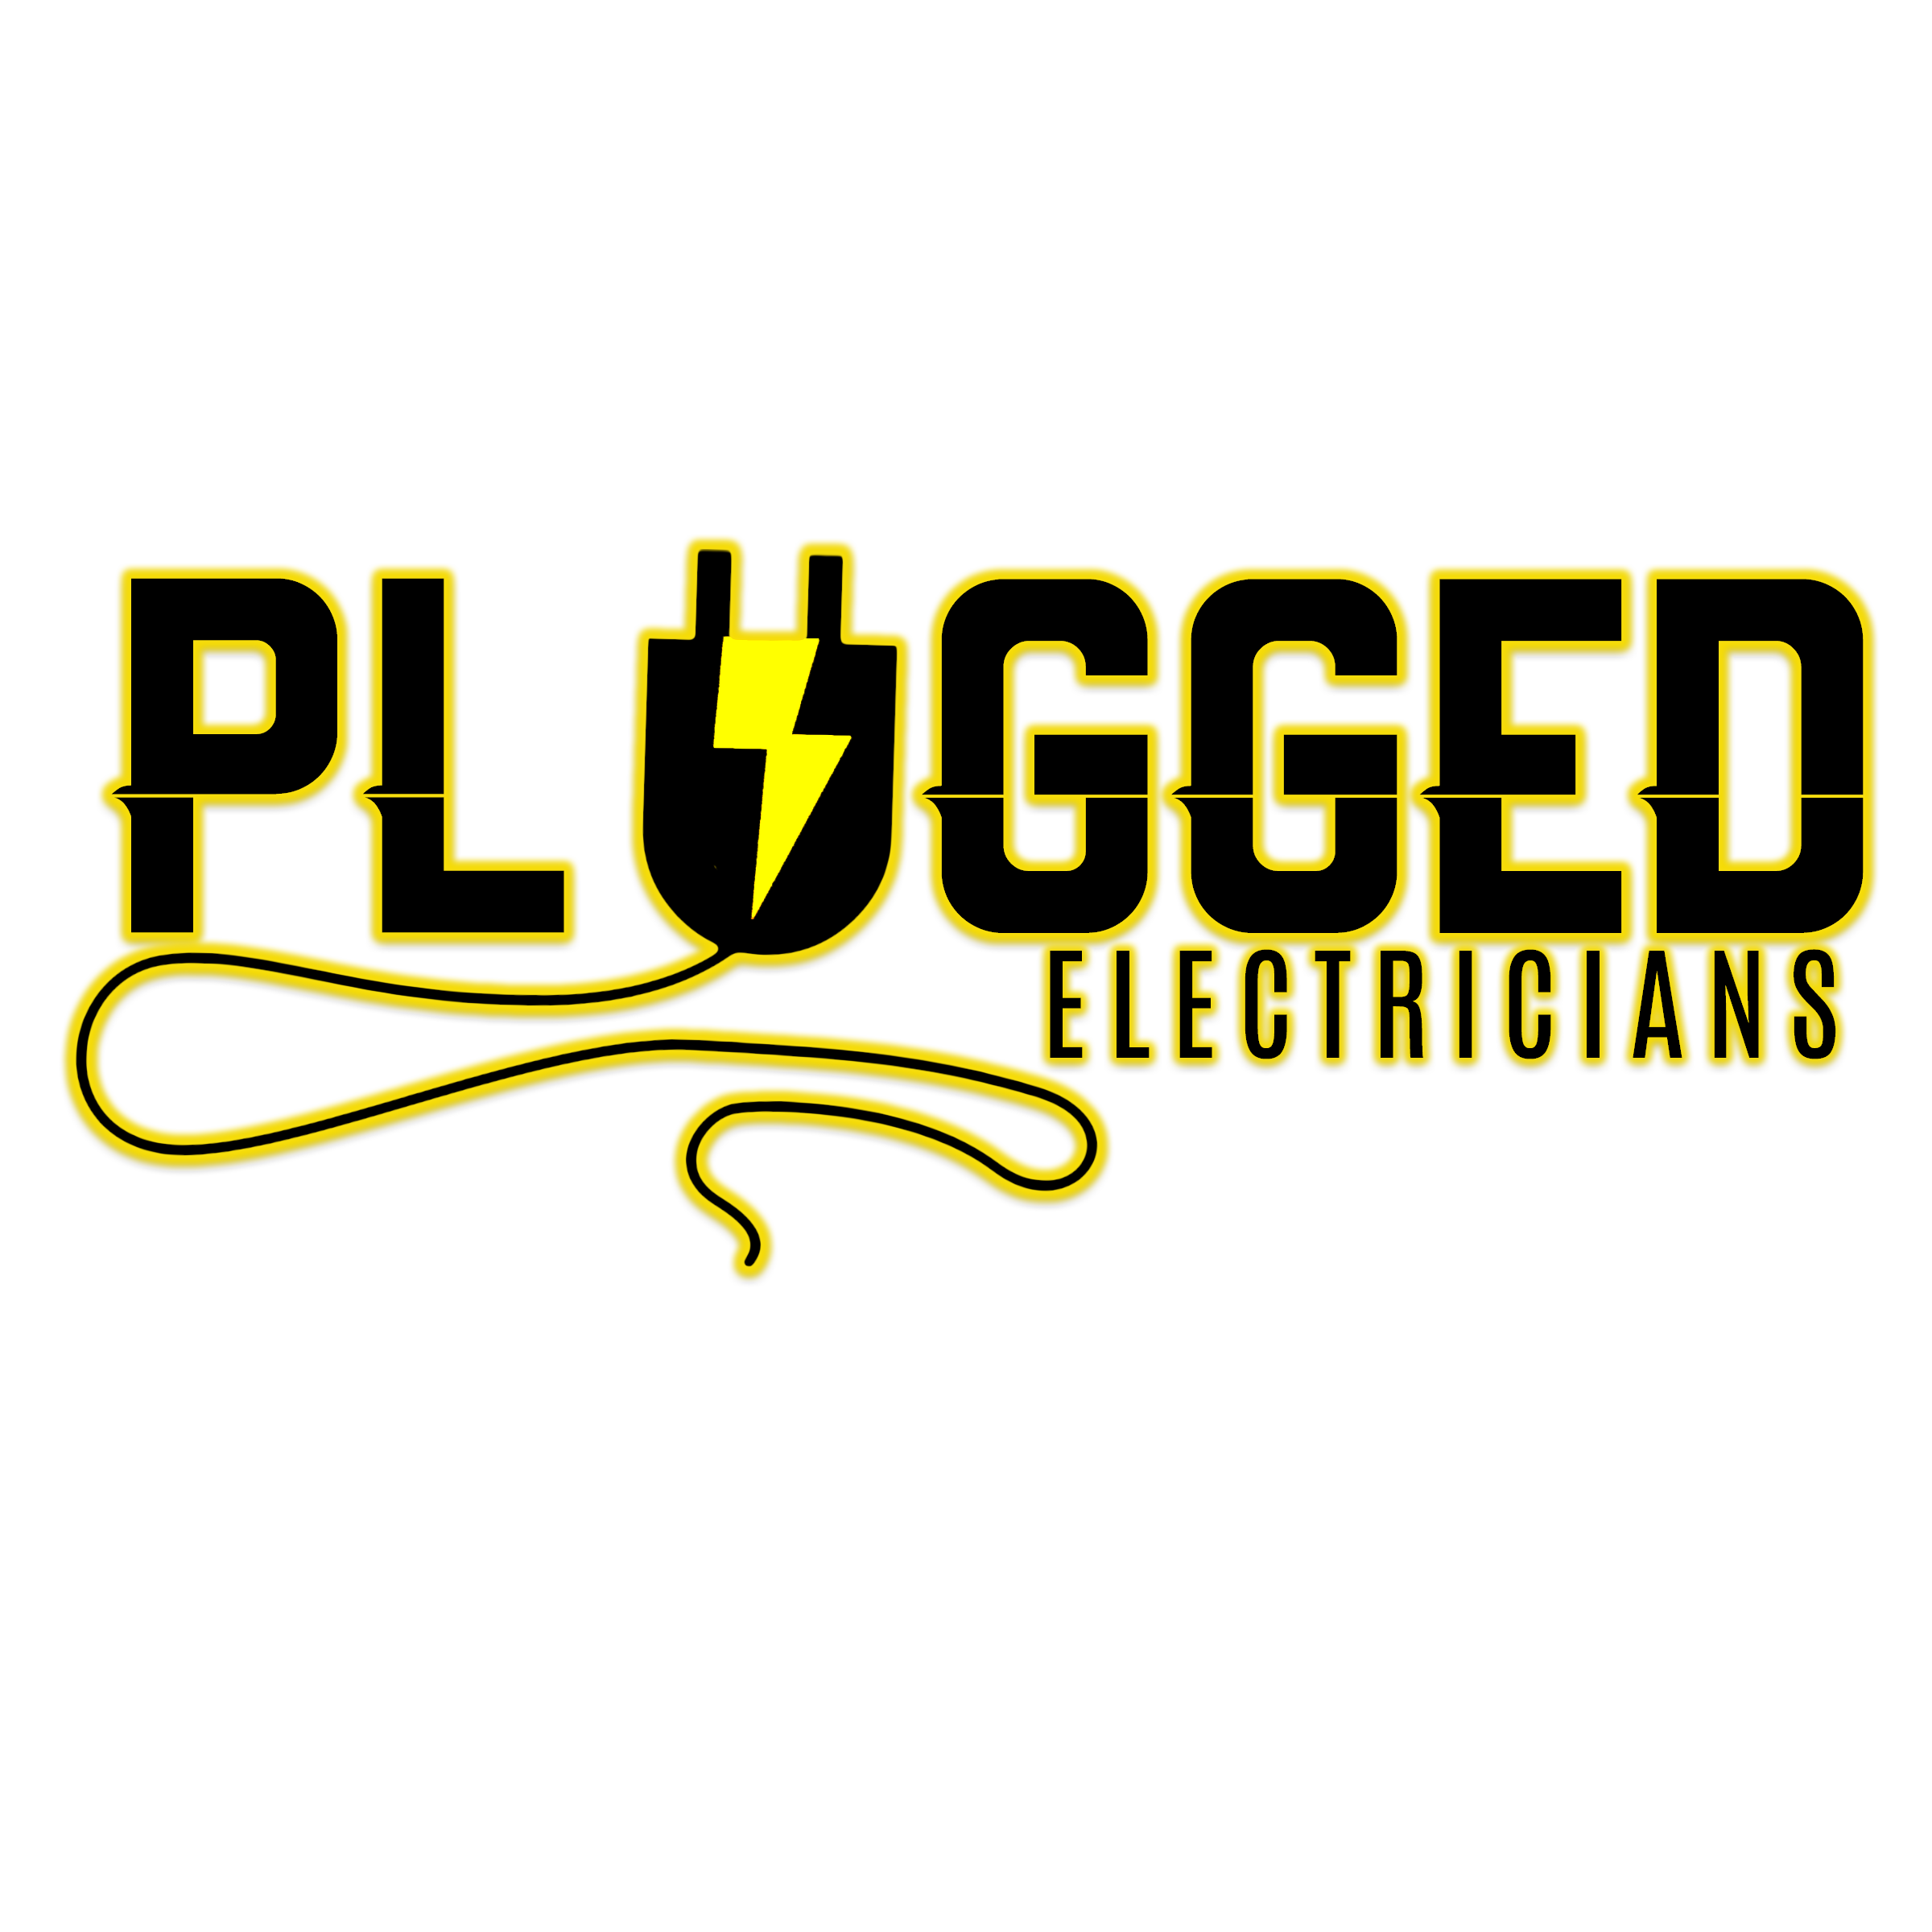 Plugged Electricians - Home  Facebook Logo